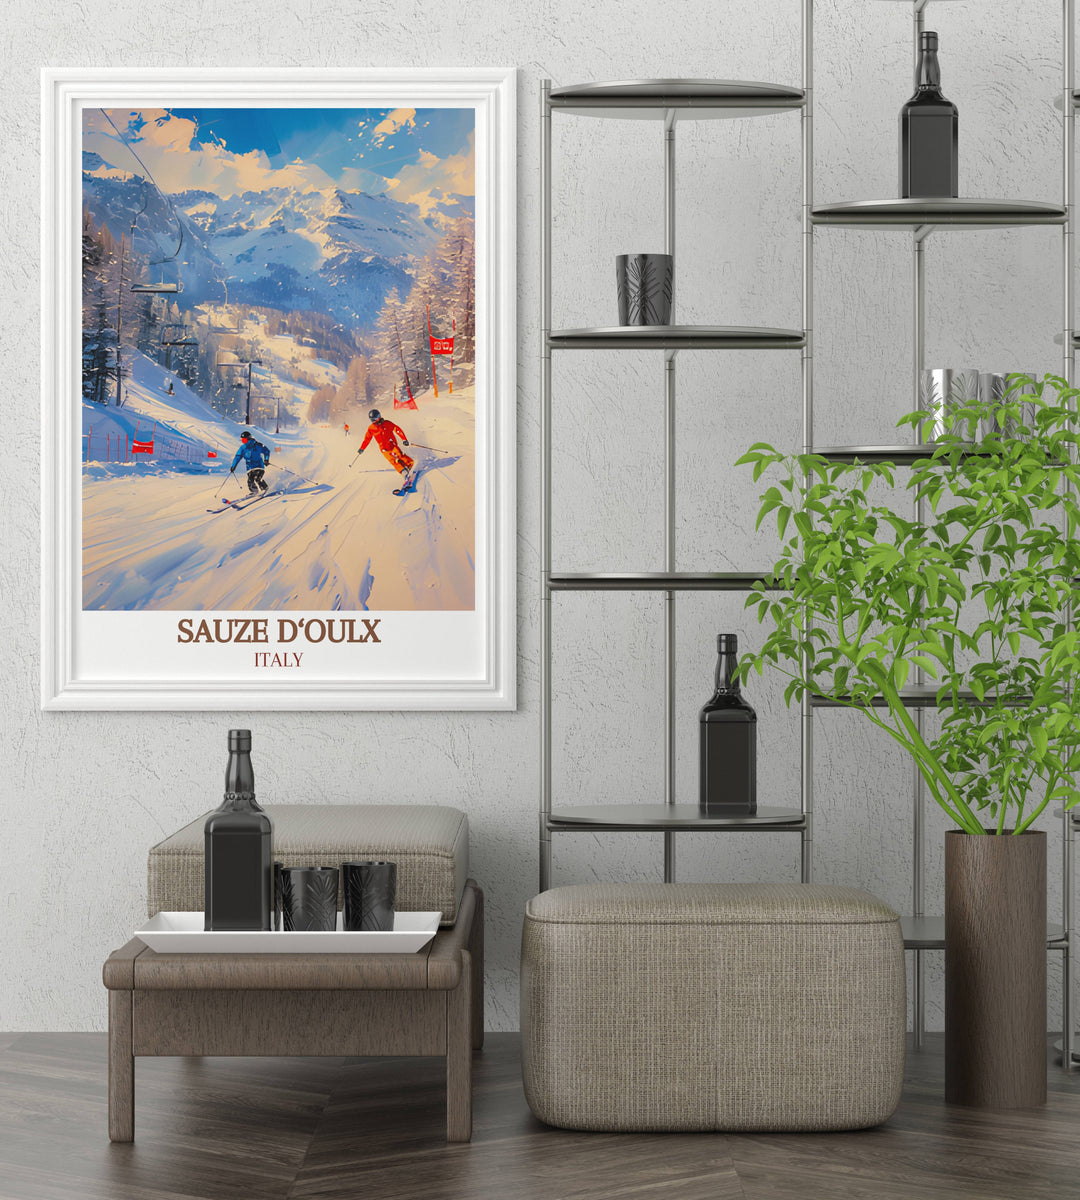 Sauze dOulx Ski Resort Gallery Wall Art offering a glimpse into the exhilarating world of alpine sports, perfect for adding a touch of adventure to your home.